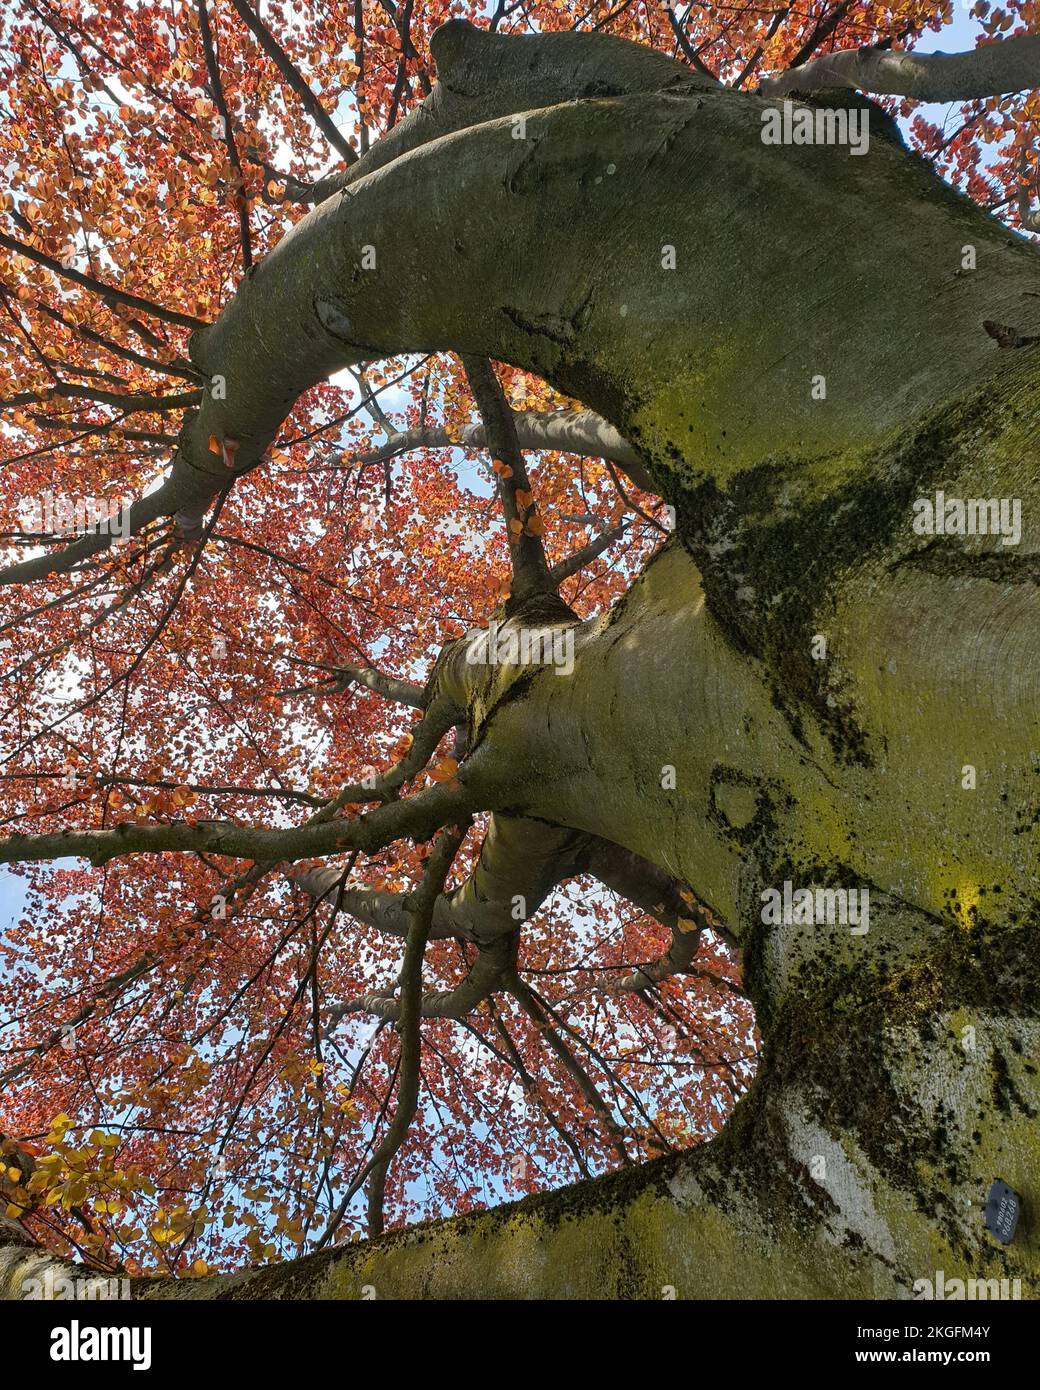 A low angle shot of a giant elephant tree (Bursera microphylla) with red leaves in autumn Stock Photo